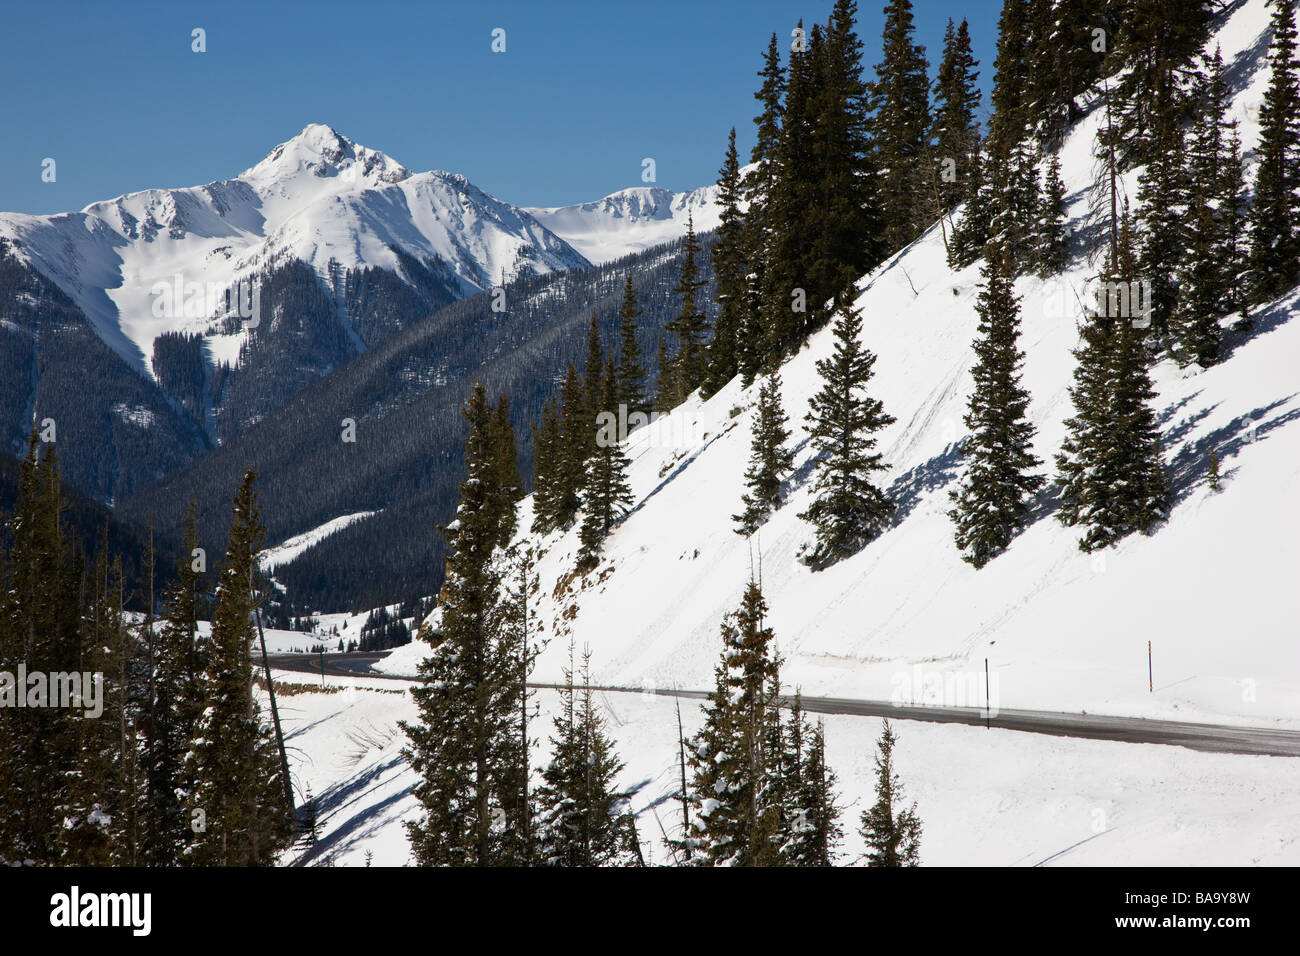 Winter view of The Million Dollar Highway western Colorado between Silverton and Ouray M D H is part of the San Juan Skyway SB Stock Photo